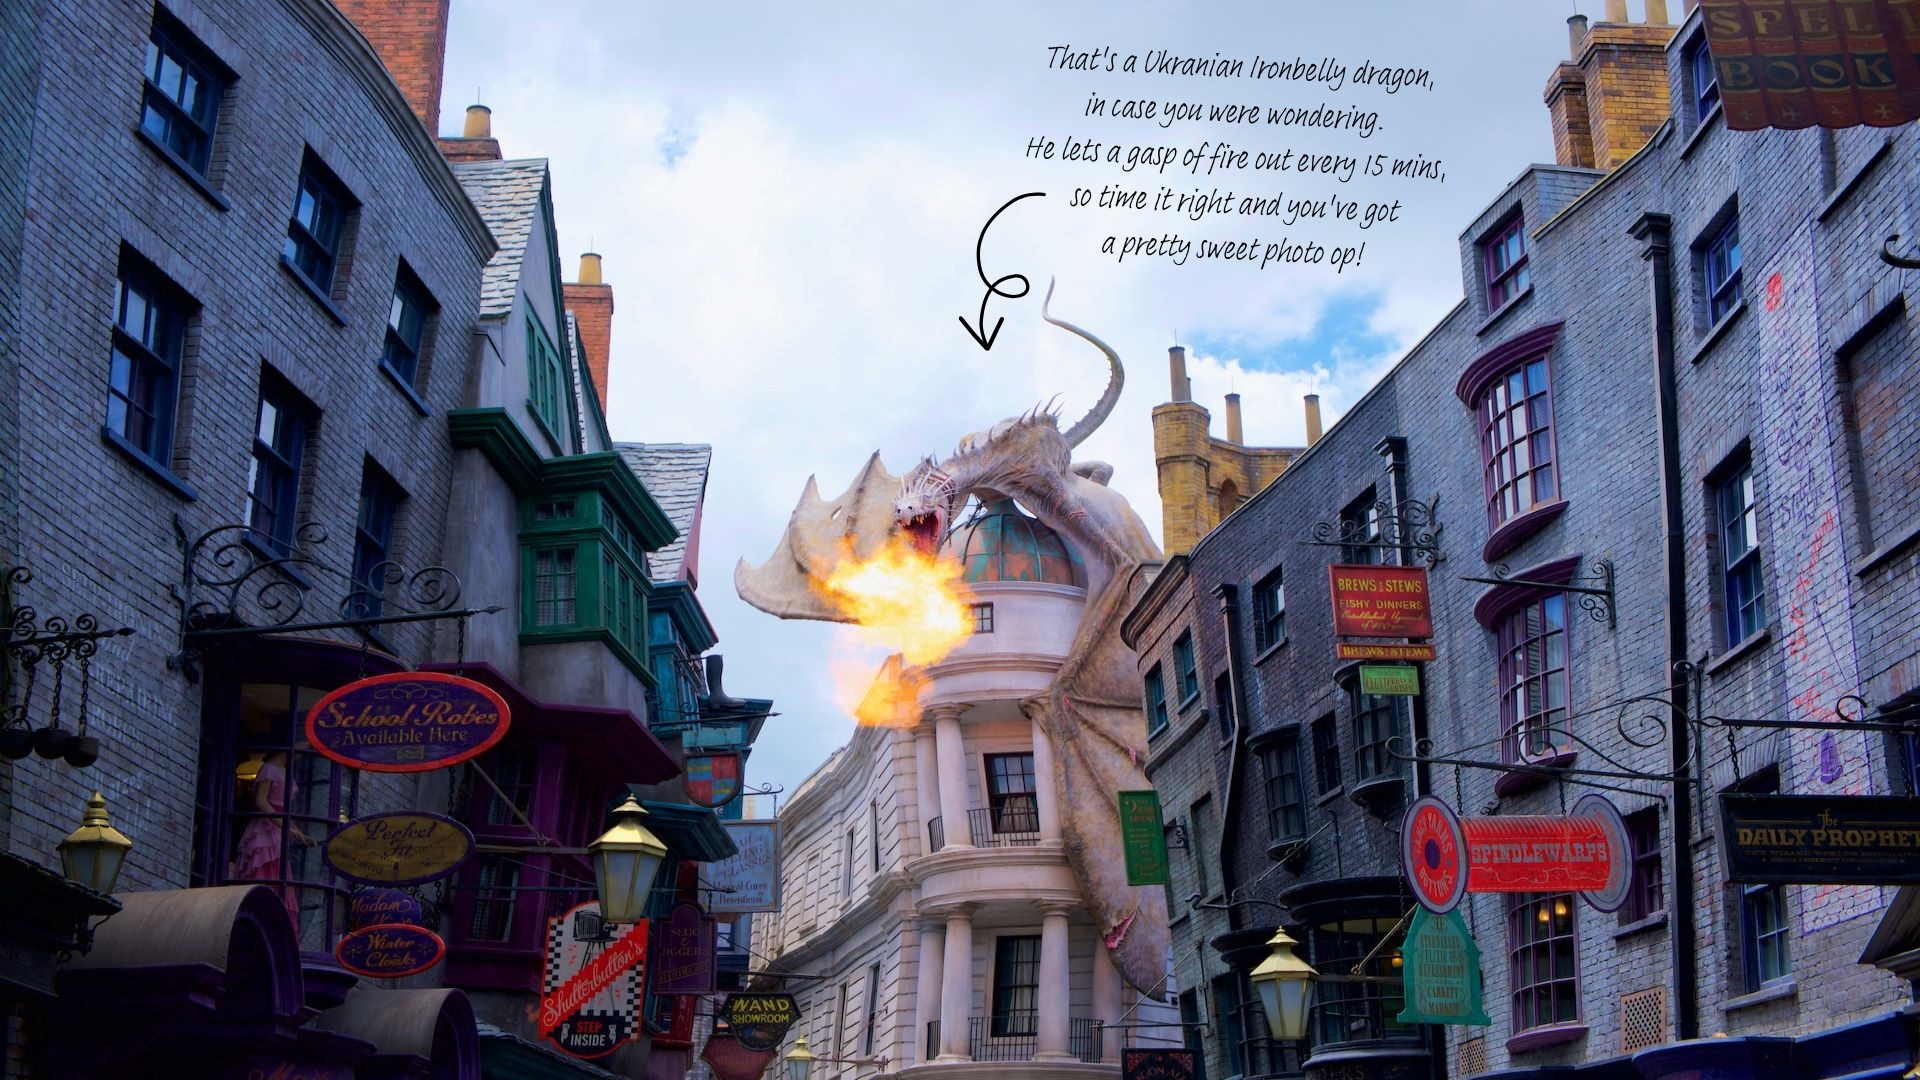 Diagon Alley at the Wizarding World of Harry Potter is one of the top 5 attractions for your Orlando getaway